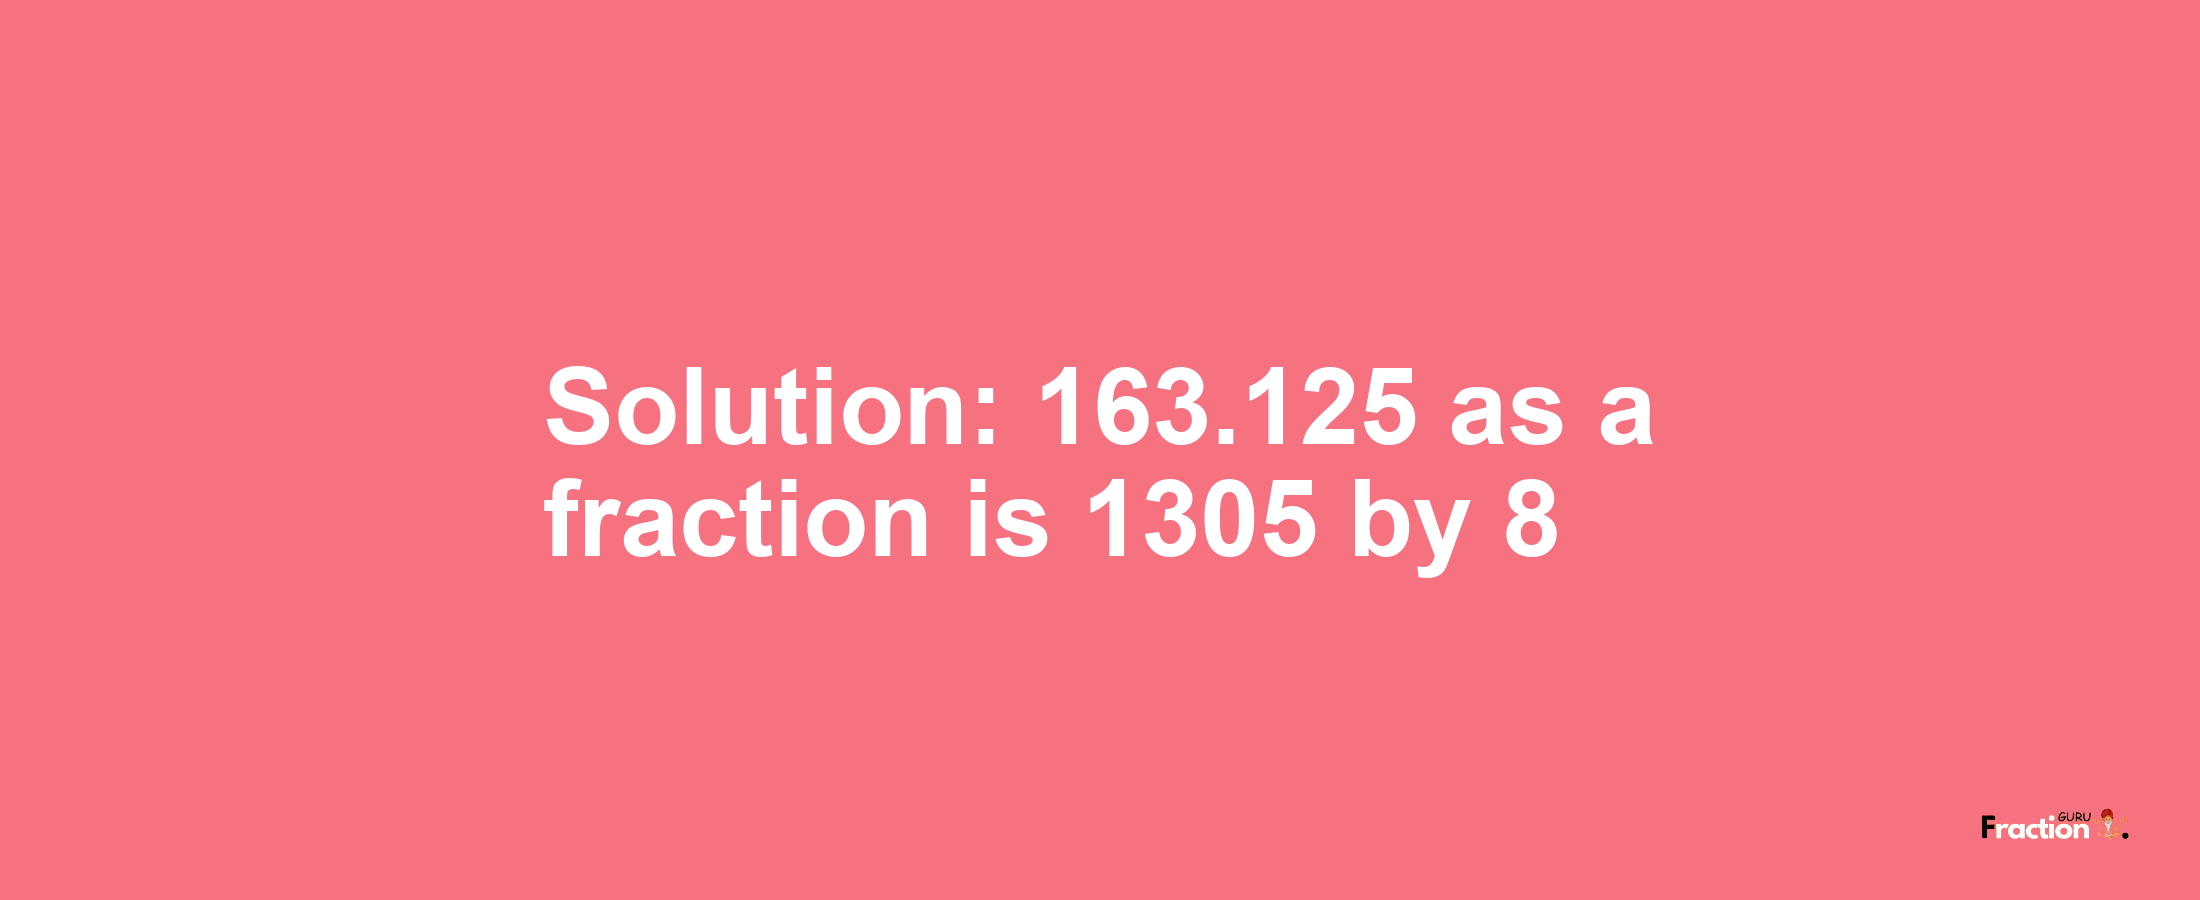 Solution:163.125 as a fraction is 1305/8